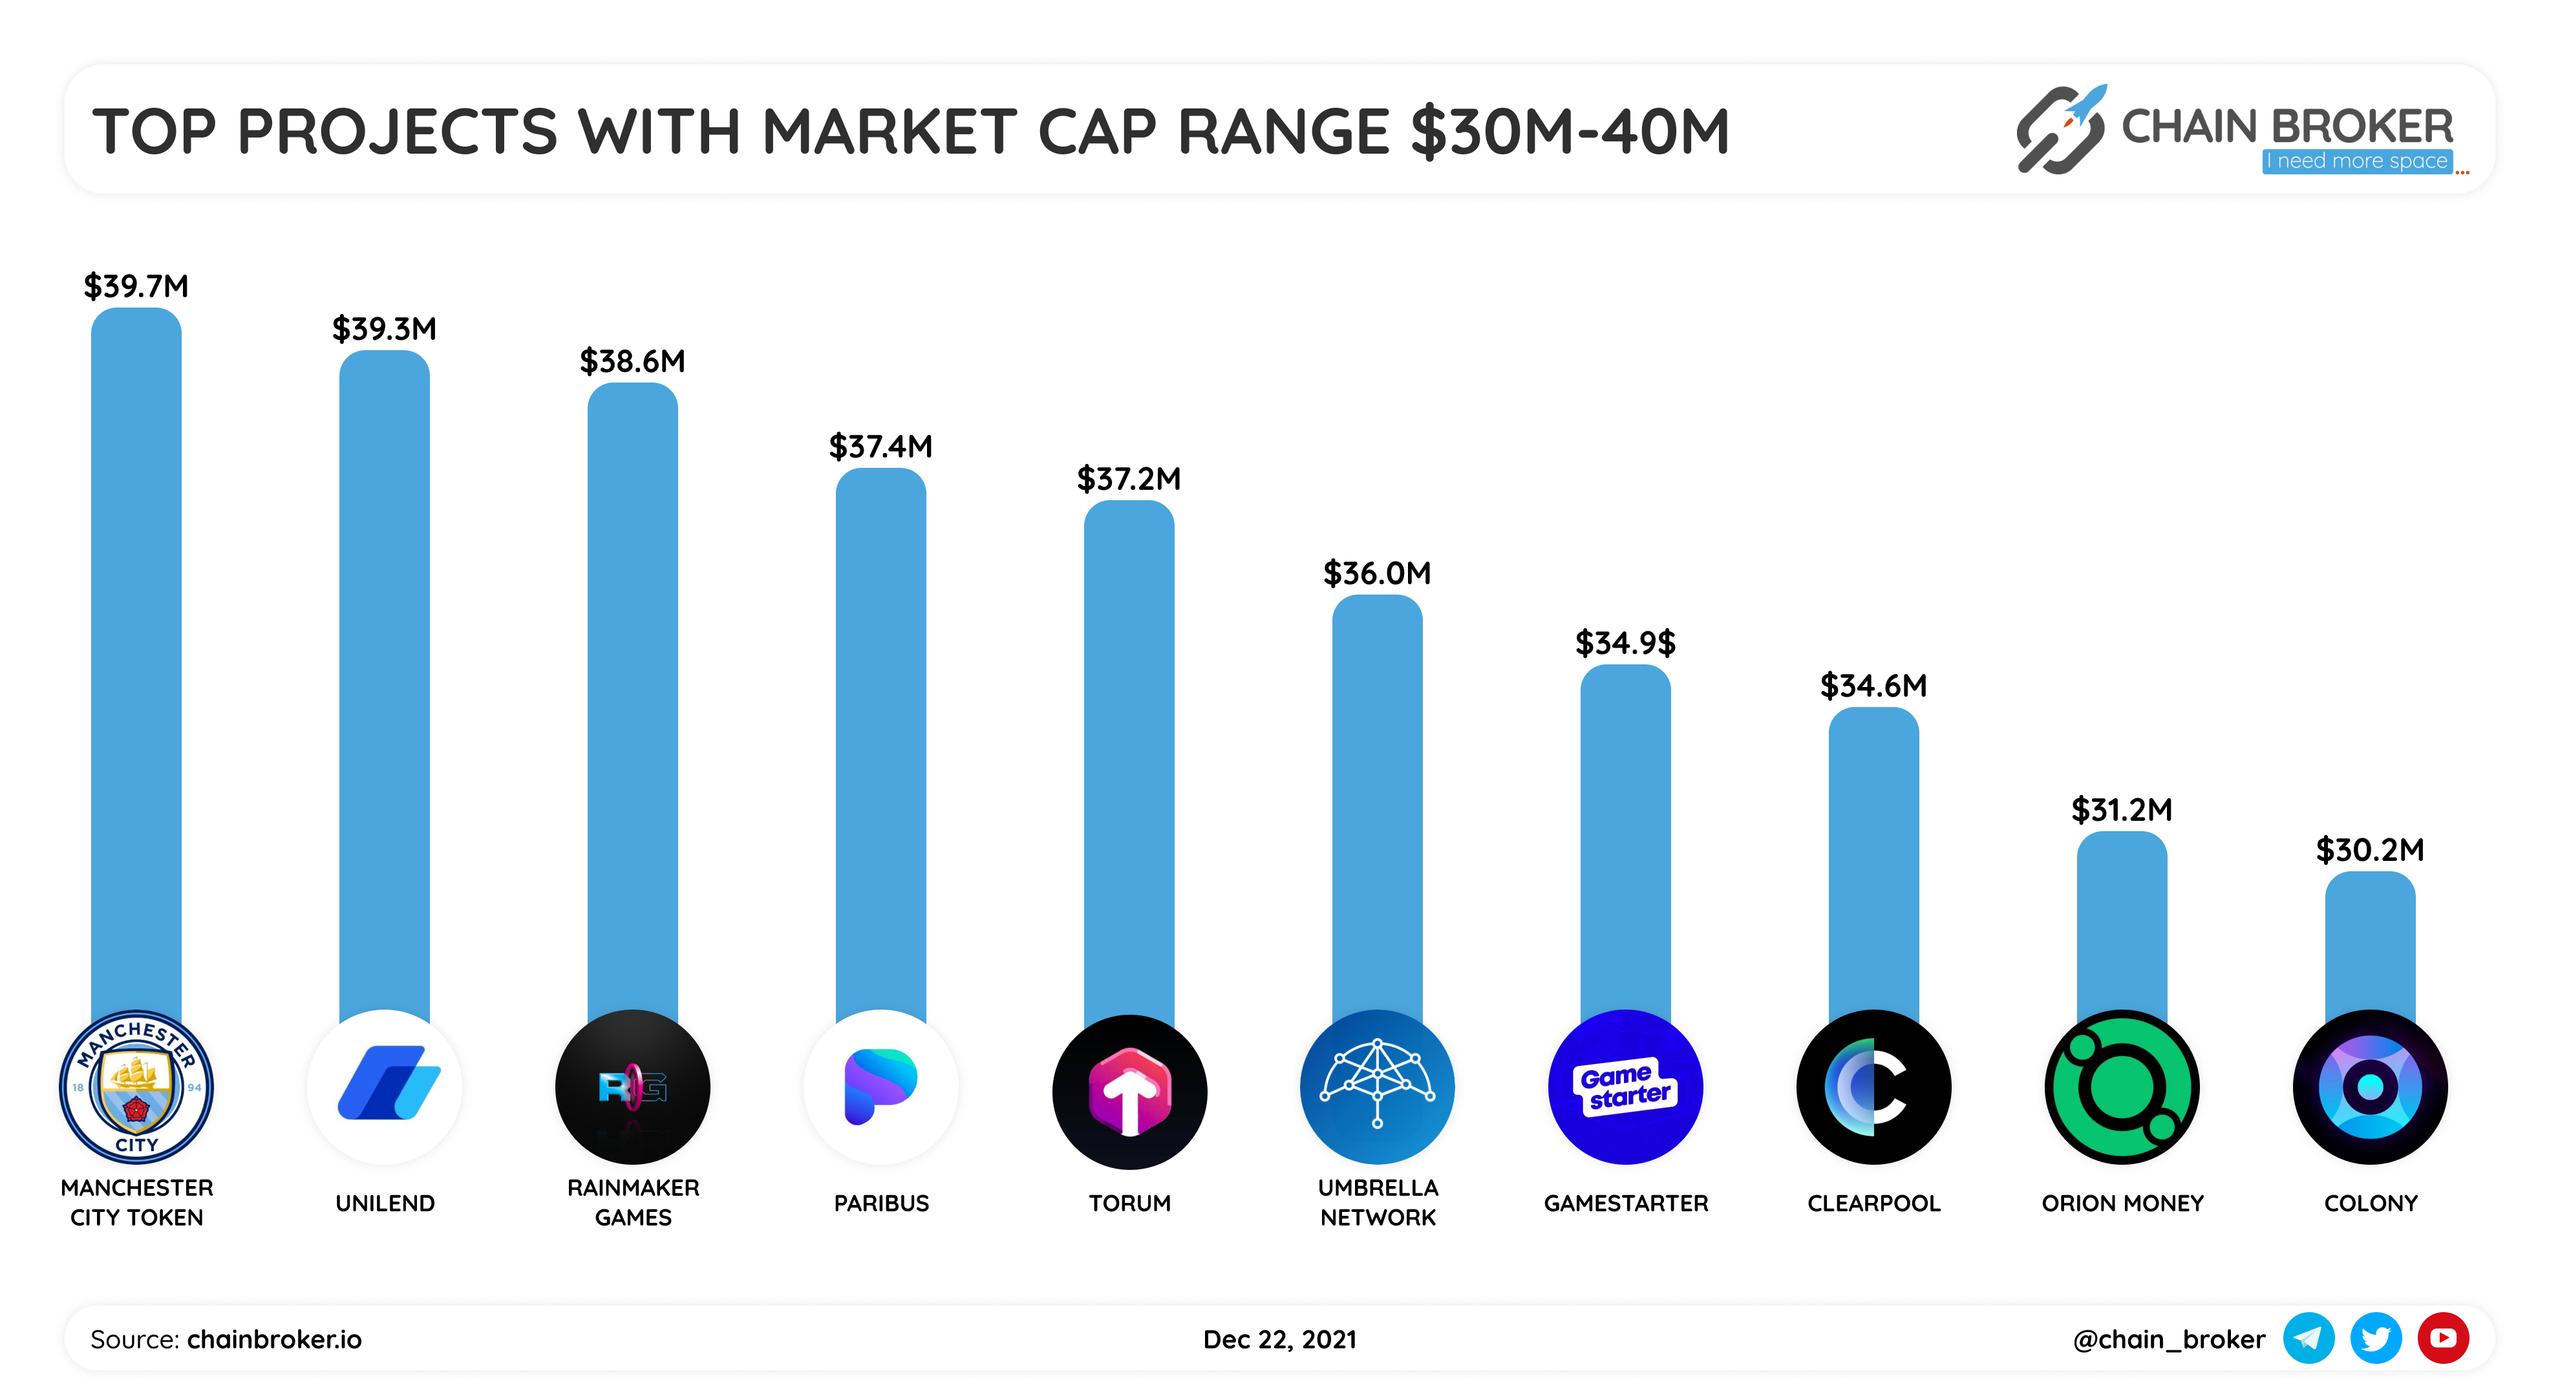 Top projects with market cap range $30M-$40M